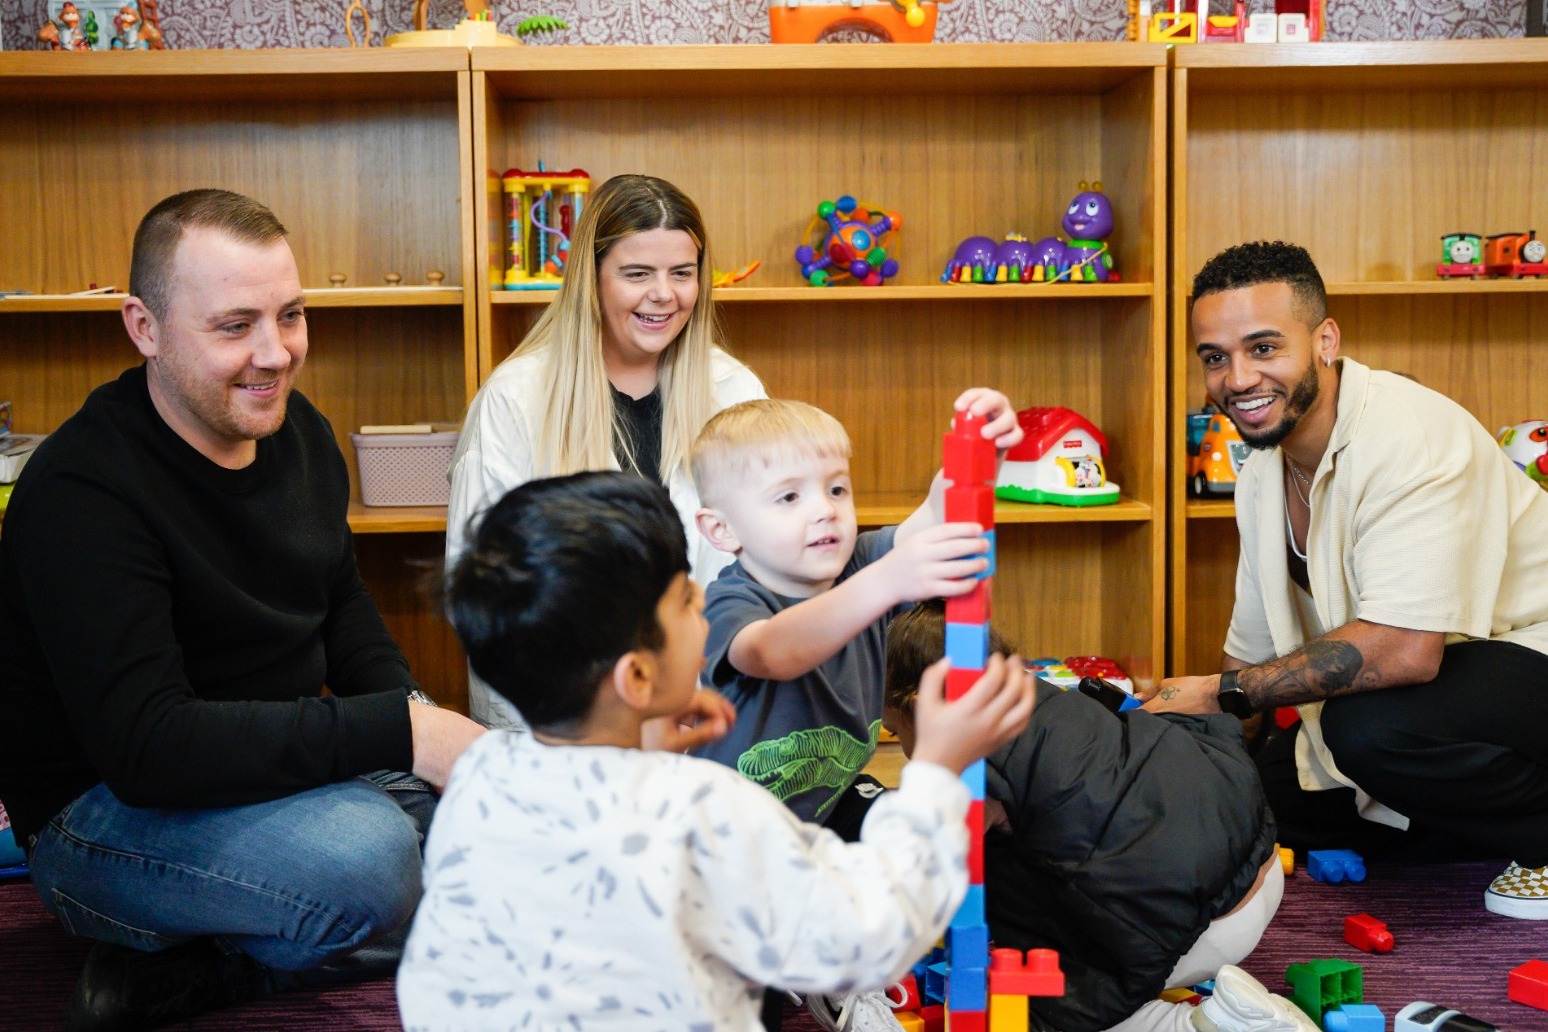 Aston Merrygold unveils charity playground made from recycled McDonald’s toys 